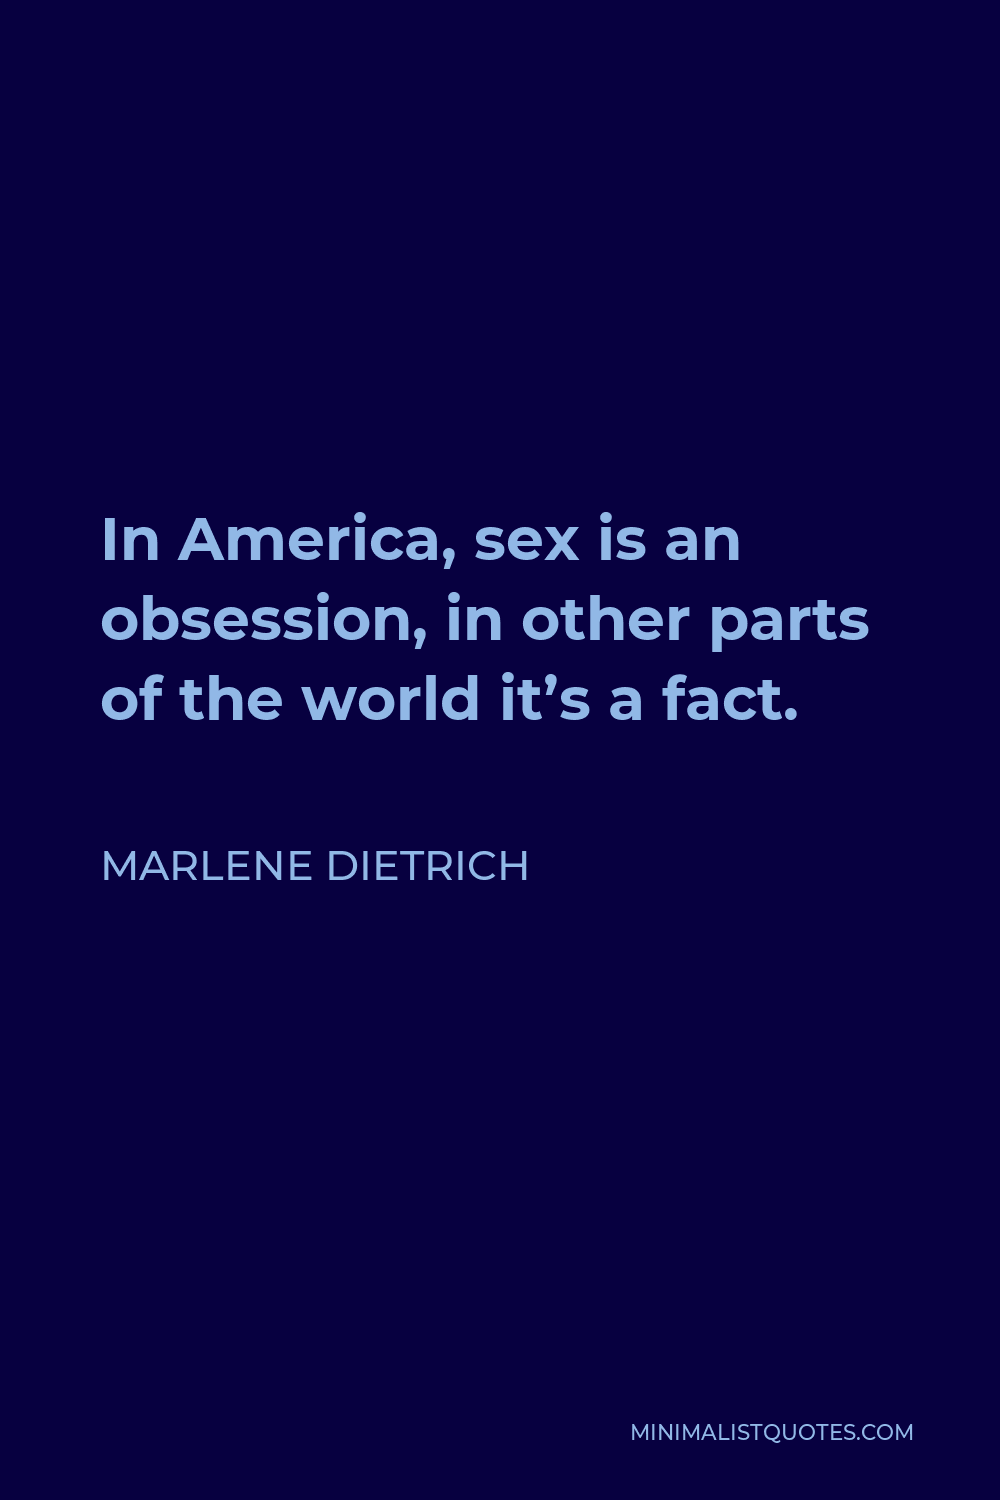 Marlene Dietrich Quote In America Sex Is An Obsession In Other Parts Of The World Its A Fact 